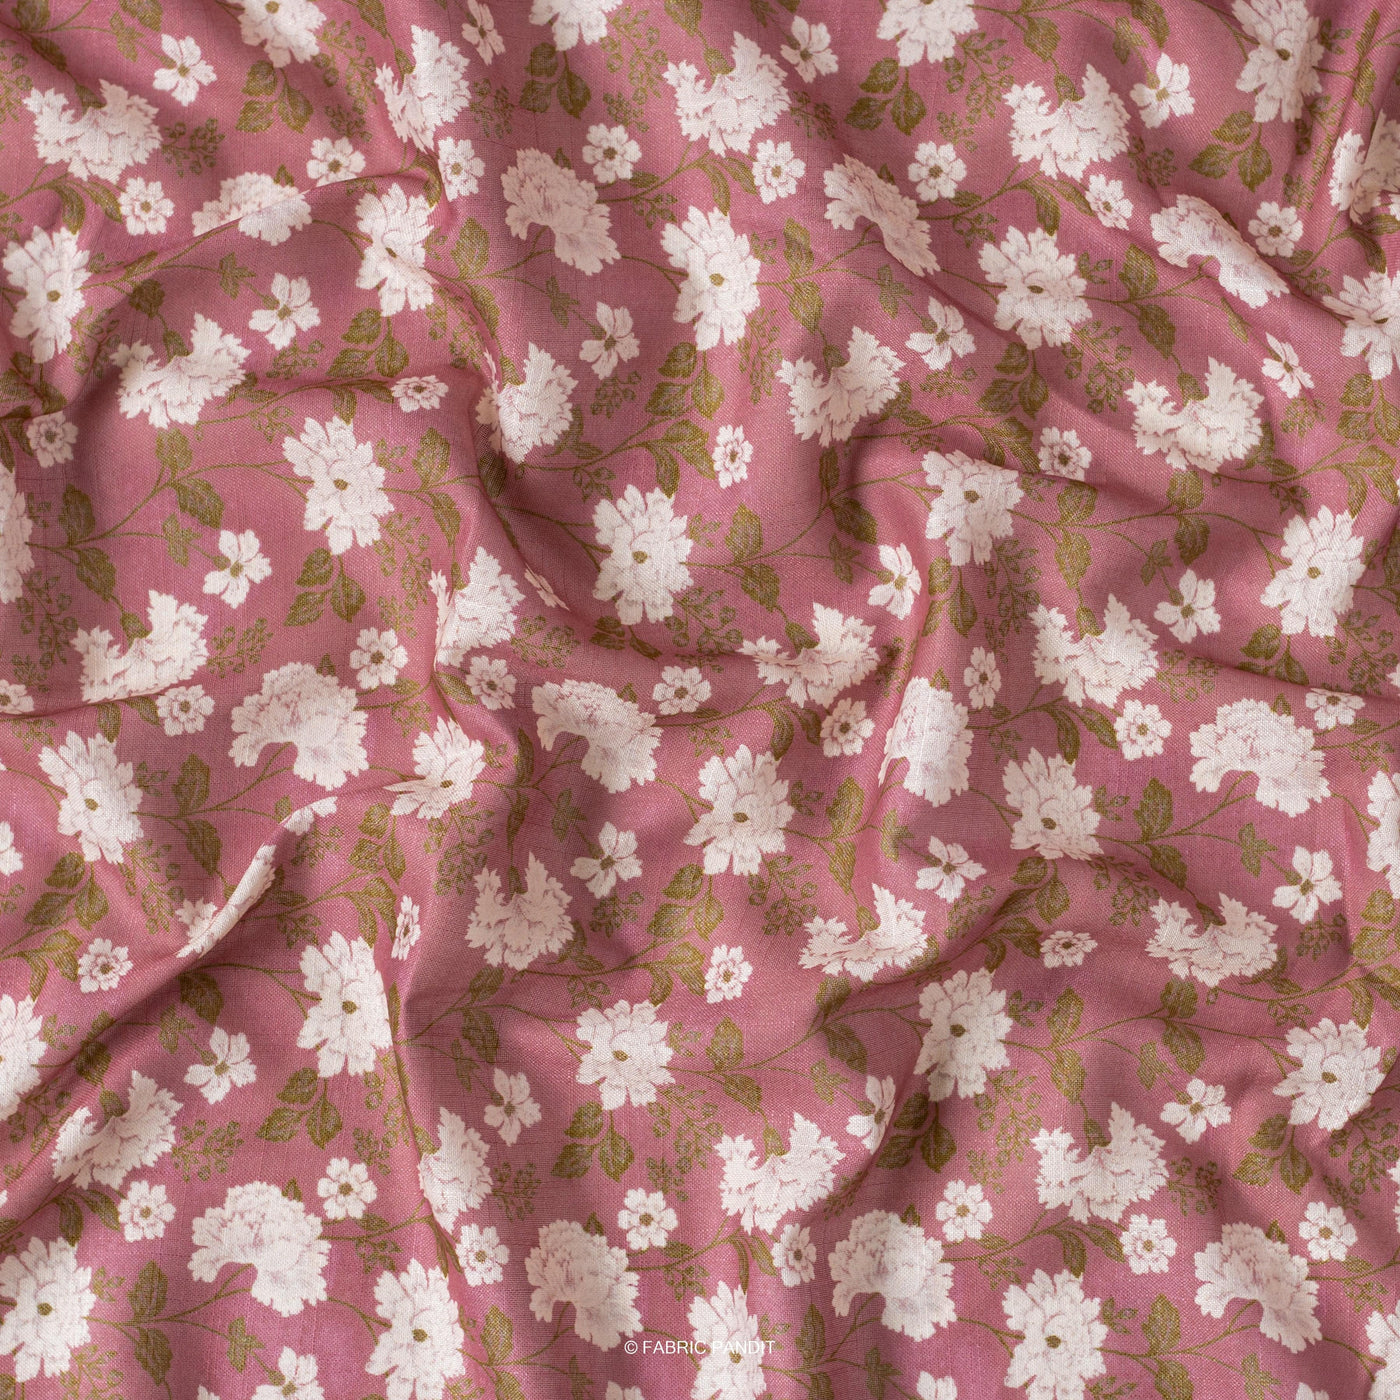 Fabric Pandit Cut Piece (CUT PIECE) Muted Pink And White Floral Jaal Pattern Digital Printed Linen Blend Slub Fabric (Width 44 Inches)